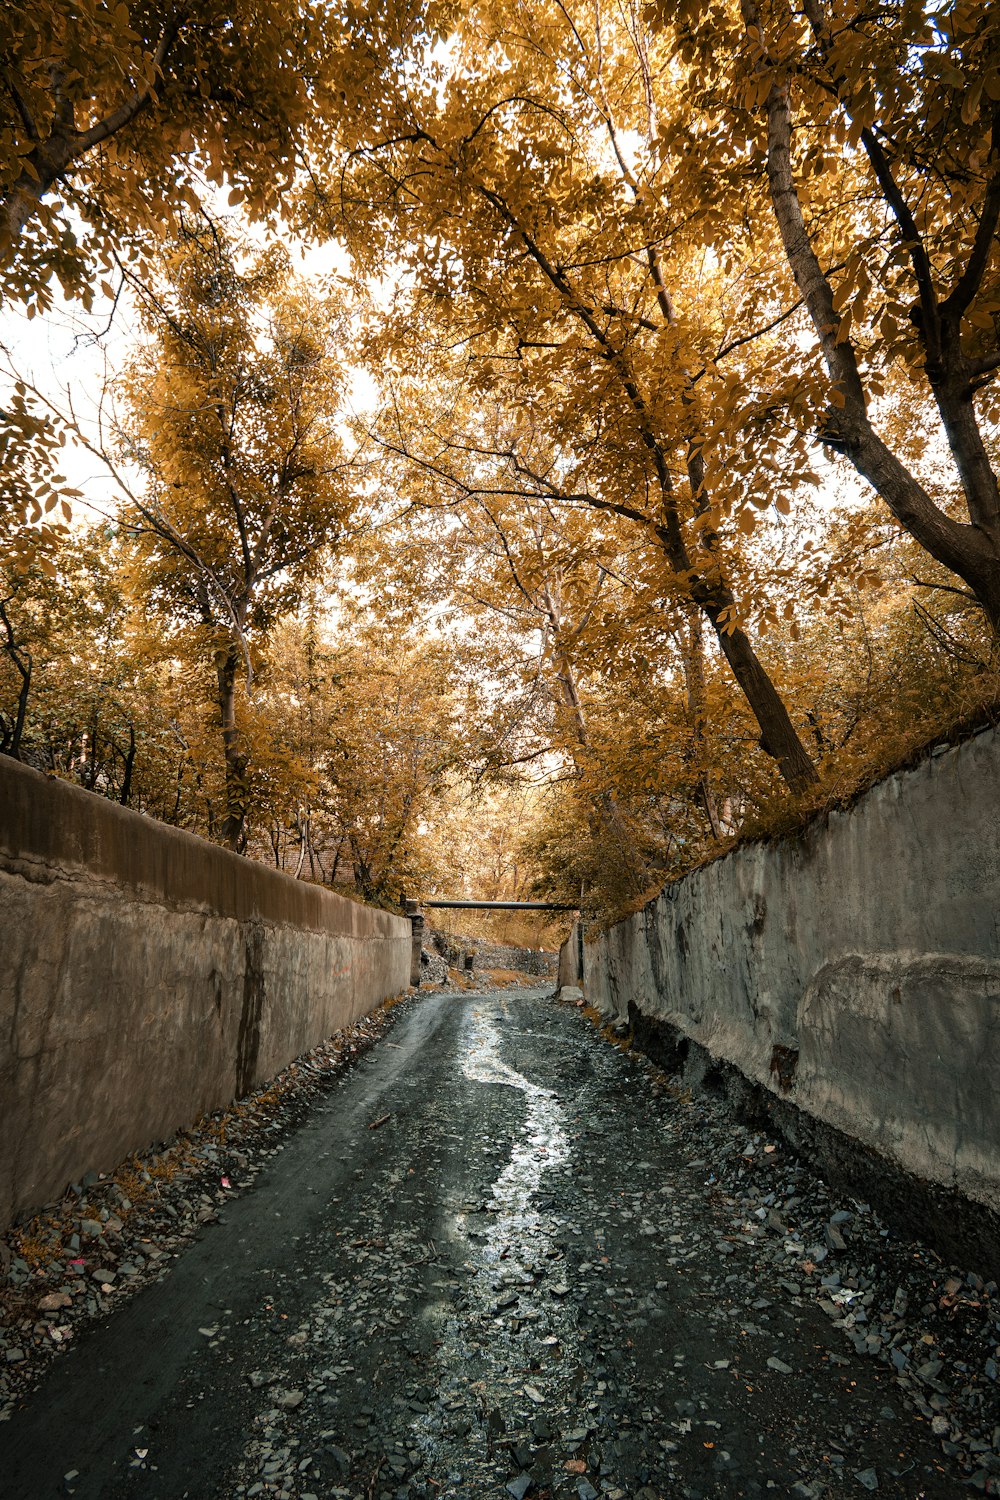 a narrow road surrounded by trees with yellow leaves